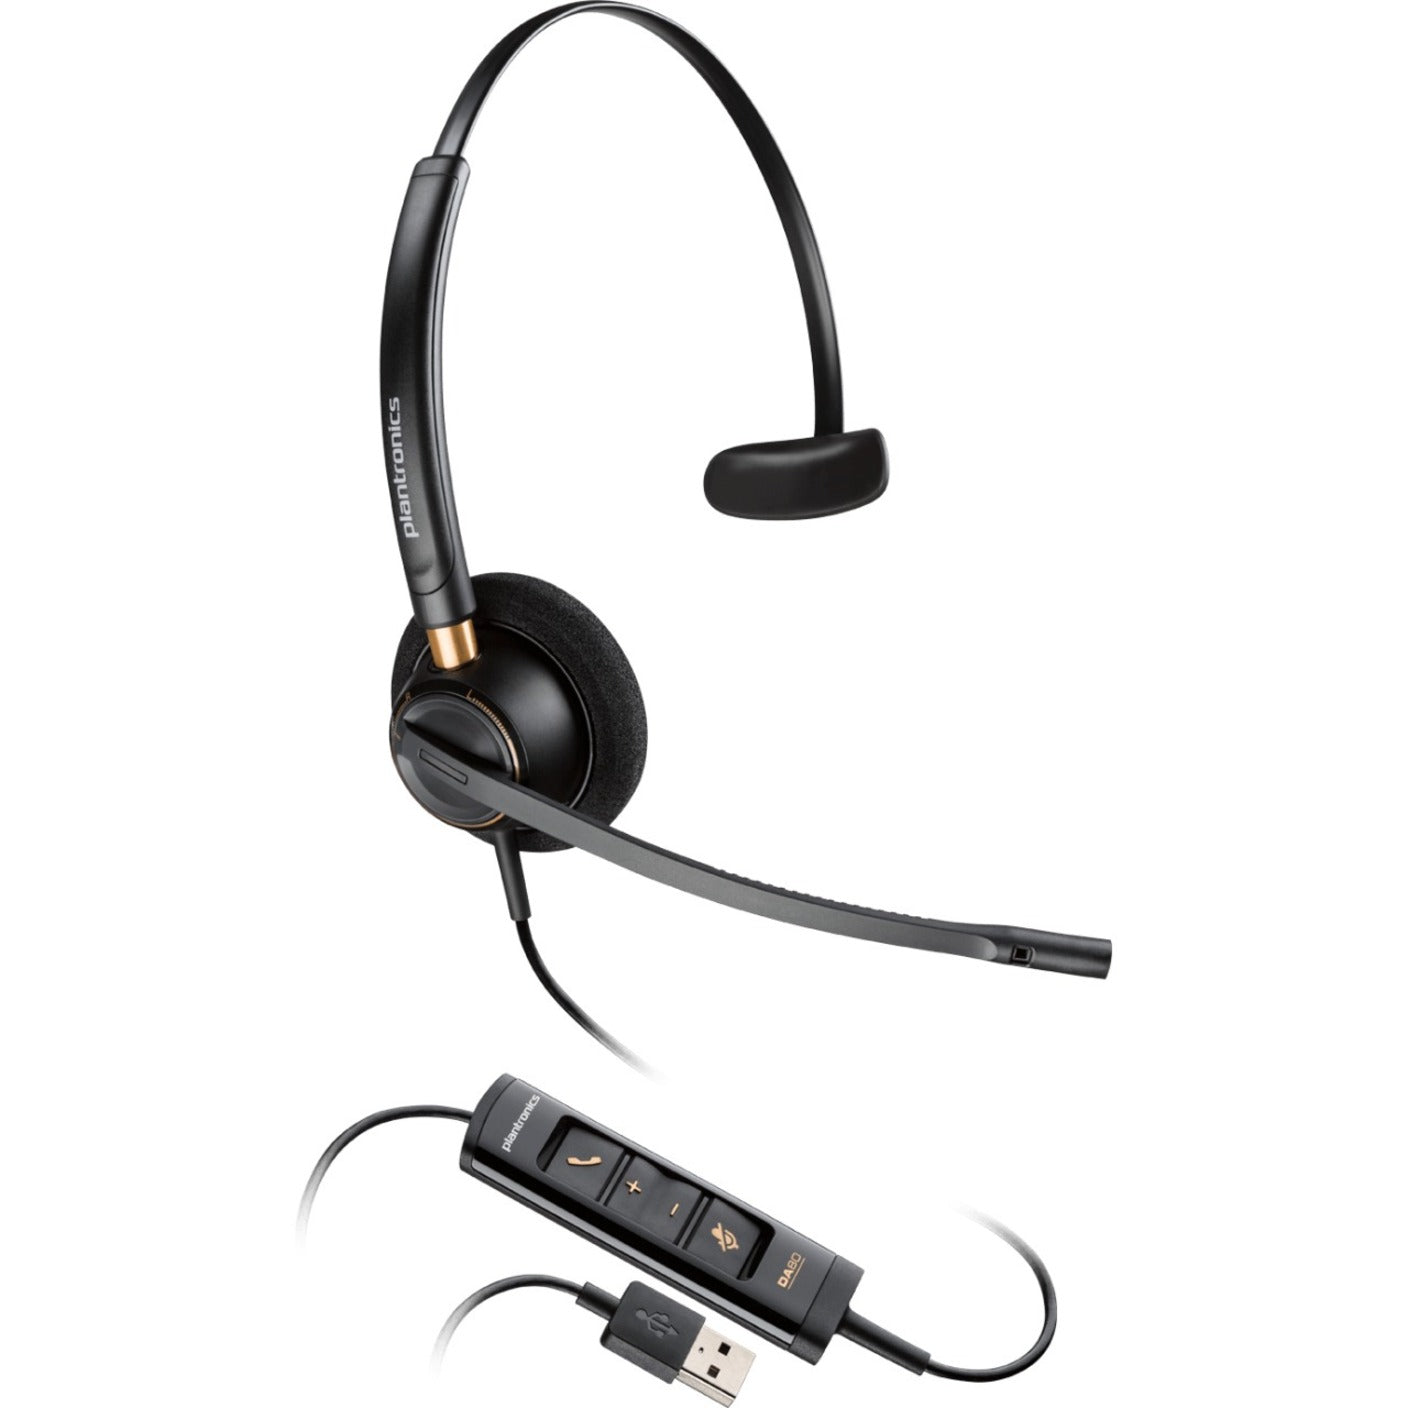 Poly 218271-01 EncorePro EP515 Headset, Monaural Over-the-head USB Type A/C Wired